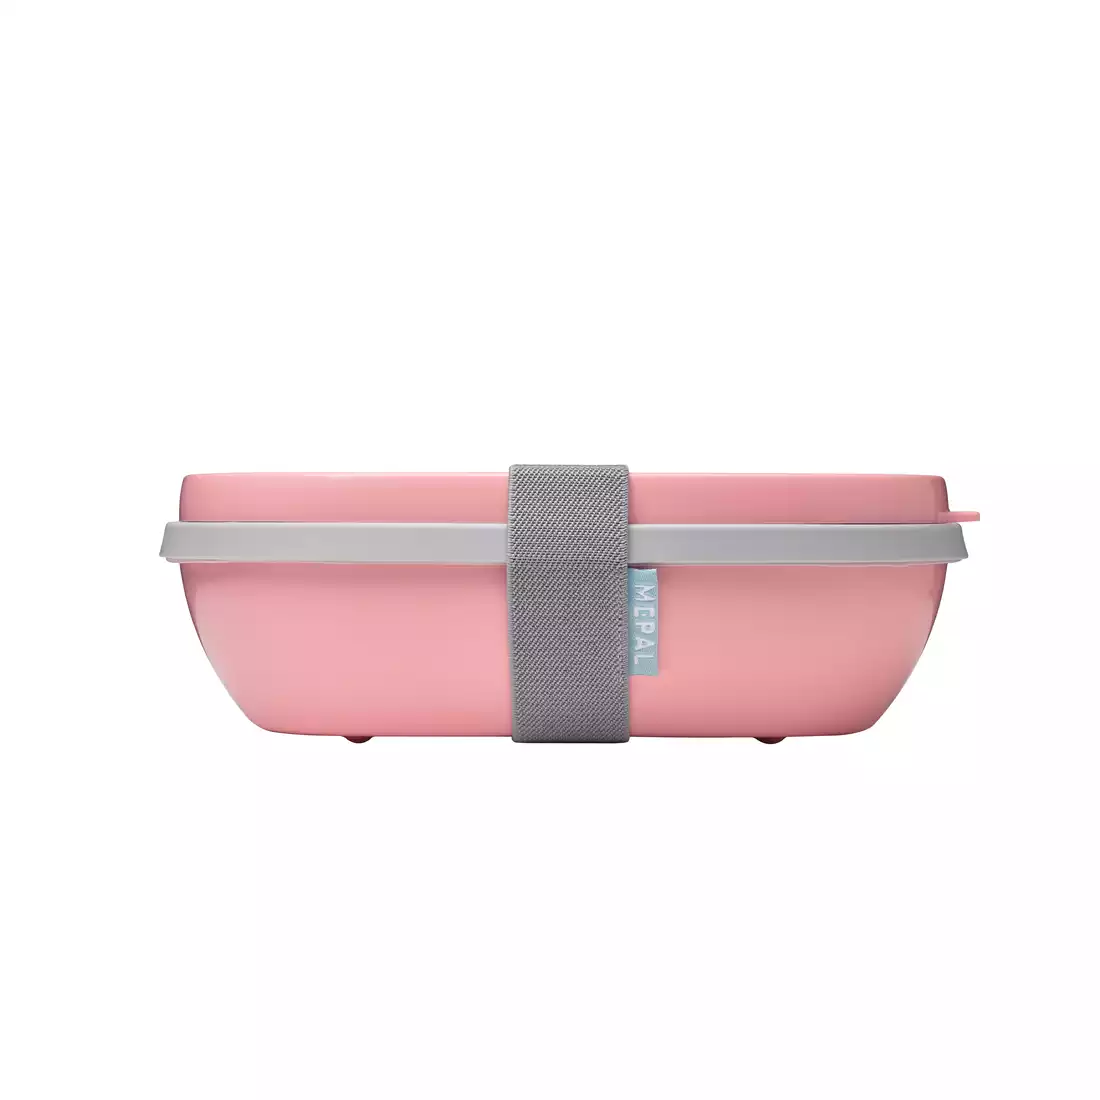 Mepal Ellipse Duo Nordic Pink lunchbox, pink